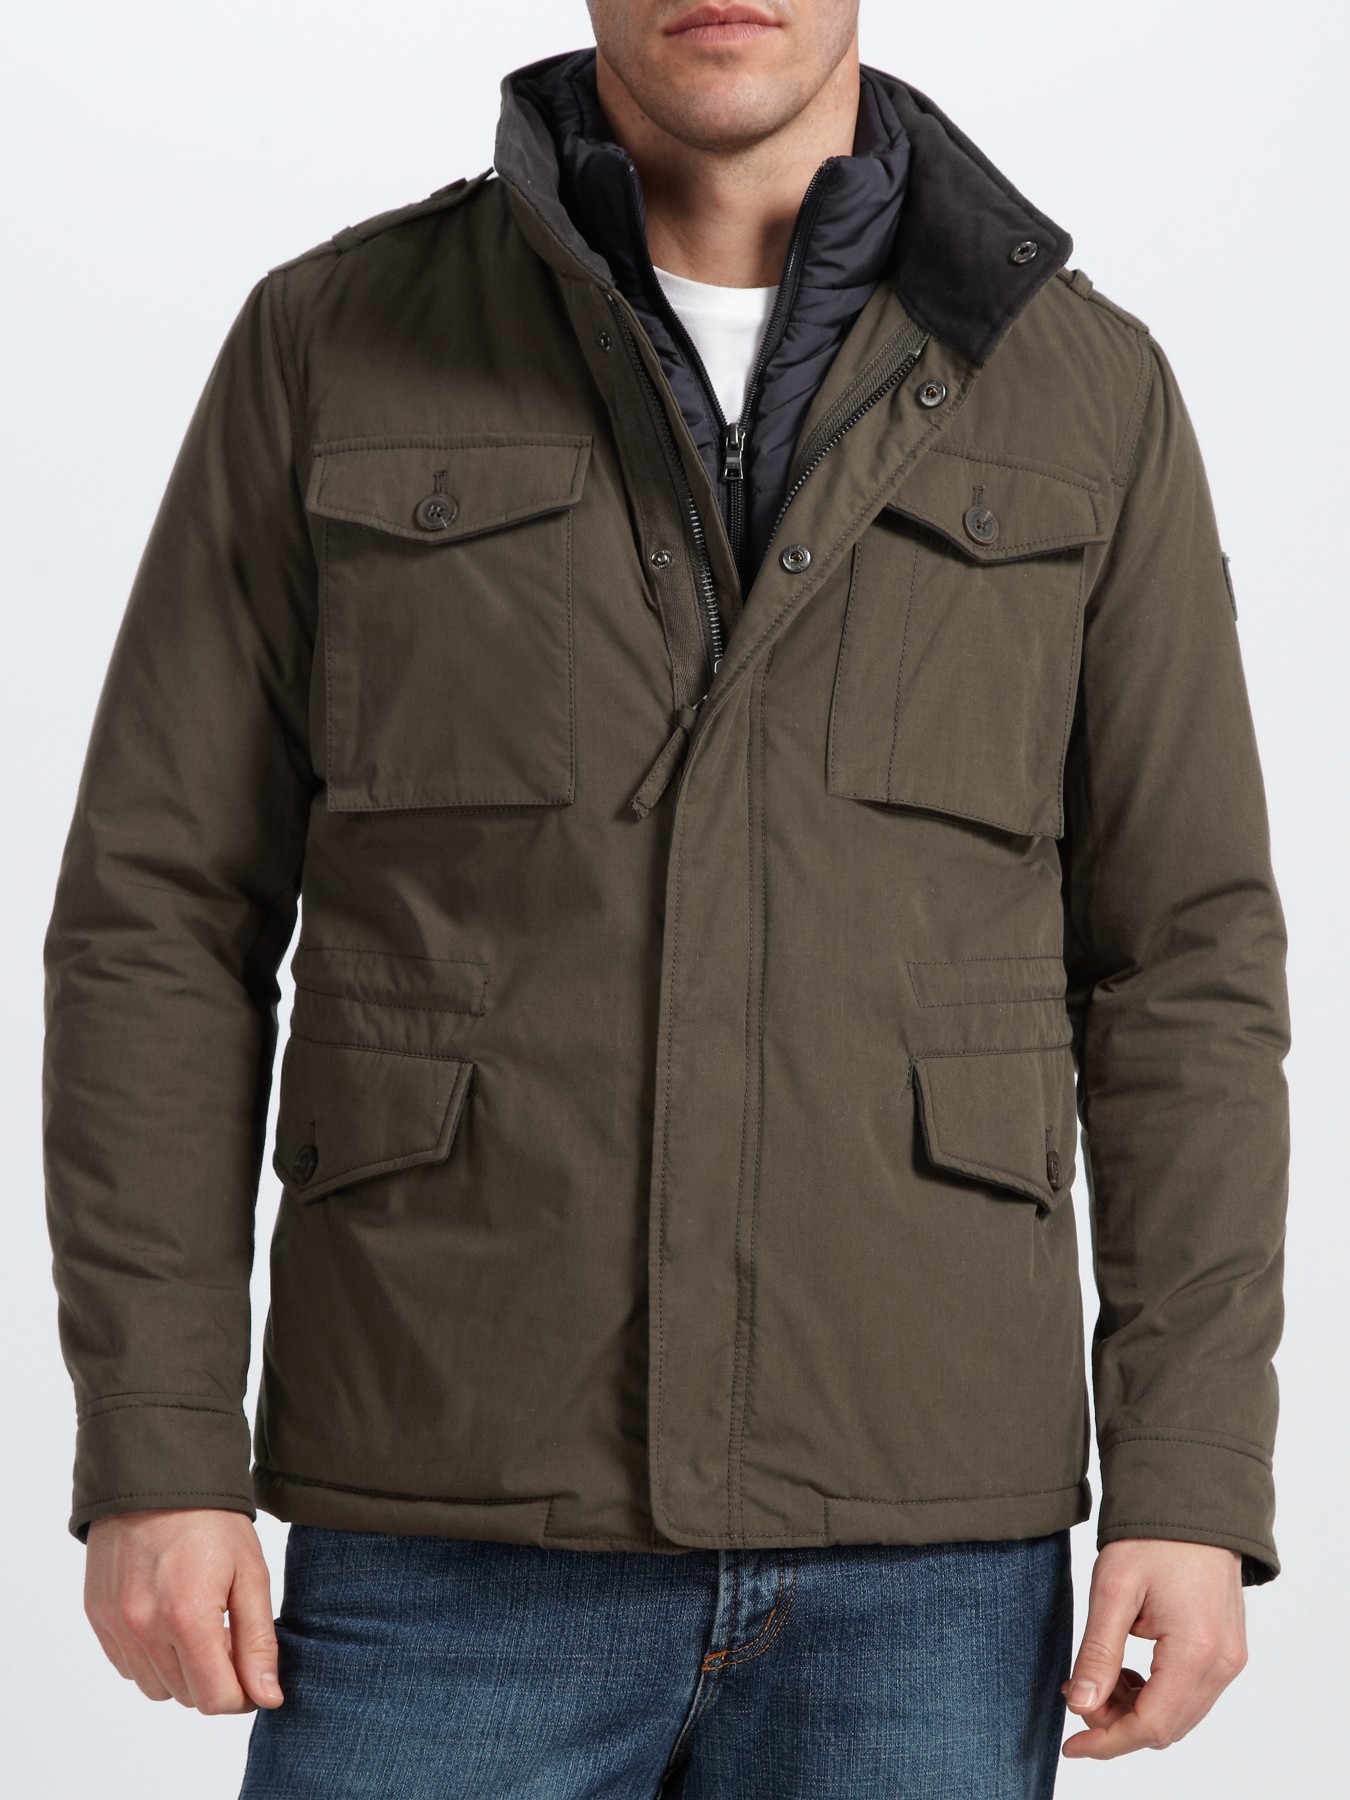 GANT Ny The G49 Jacket in Olive (Green) for Men - Lyst